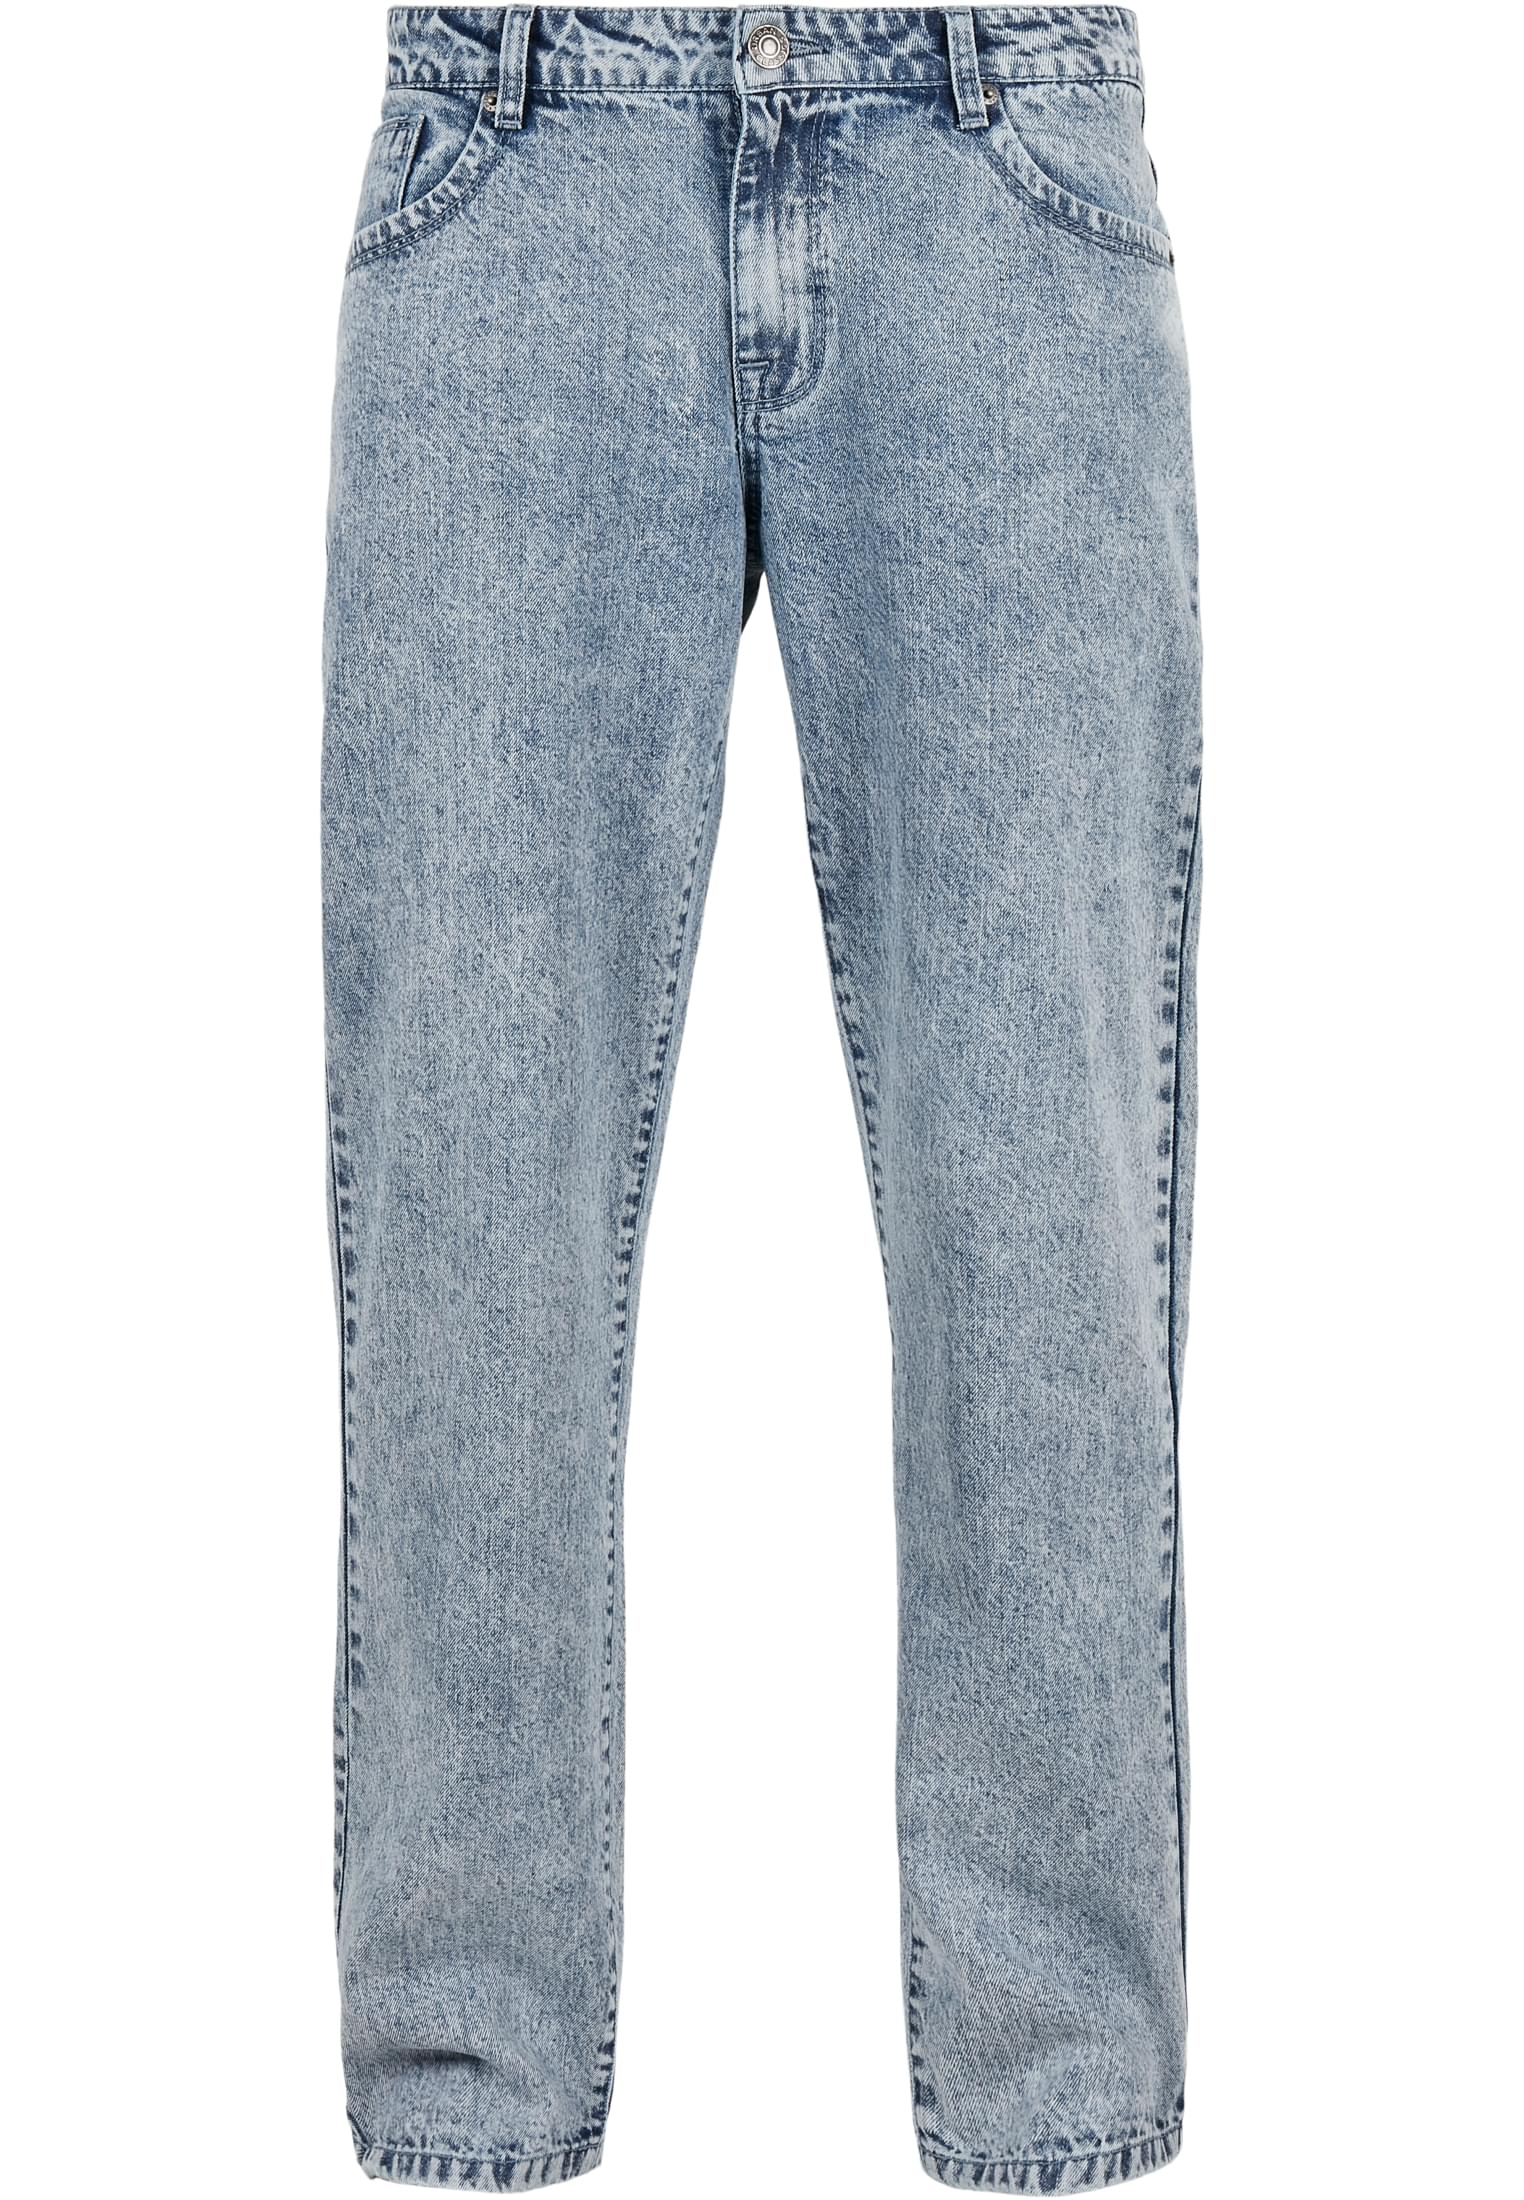 Hosen Loose Fit Jeans in Farbe light skyblue acid washed